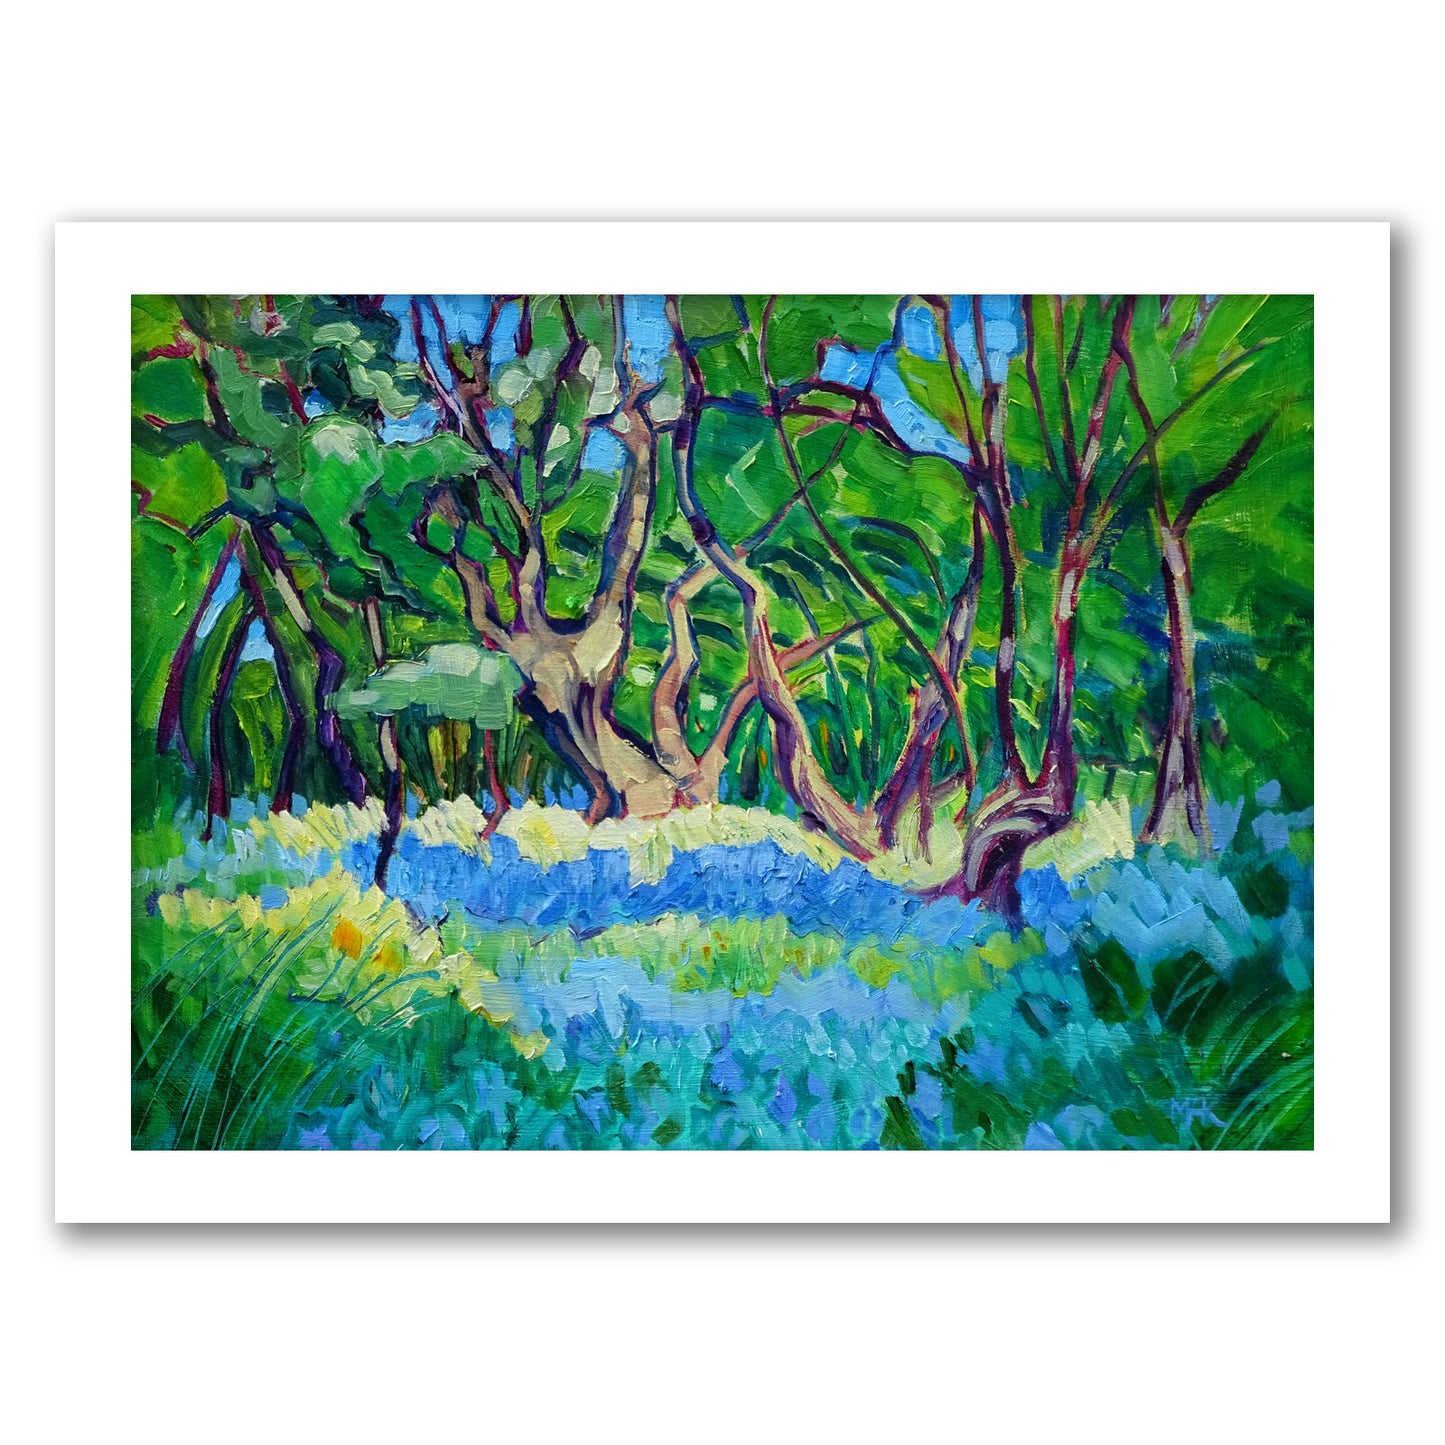 Bluebell Wood By Mary Kemp - Framed Print